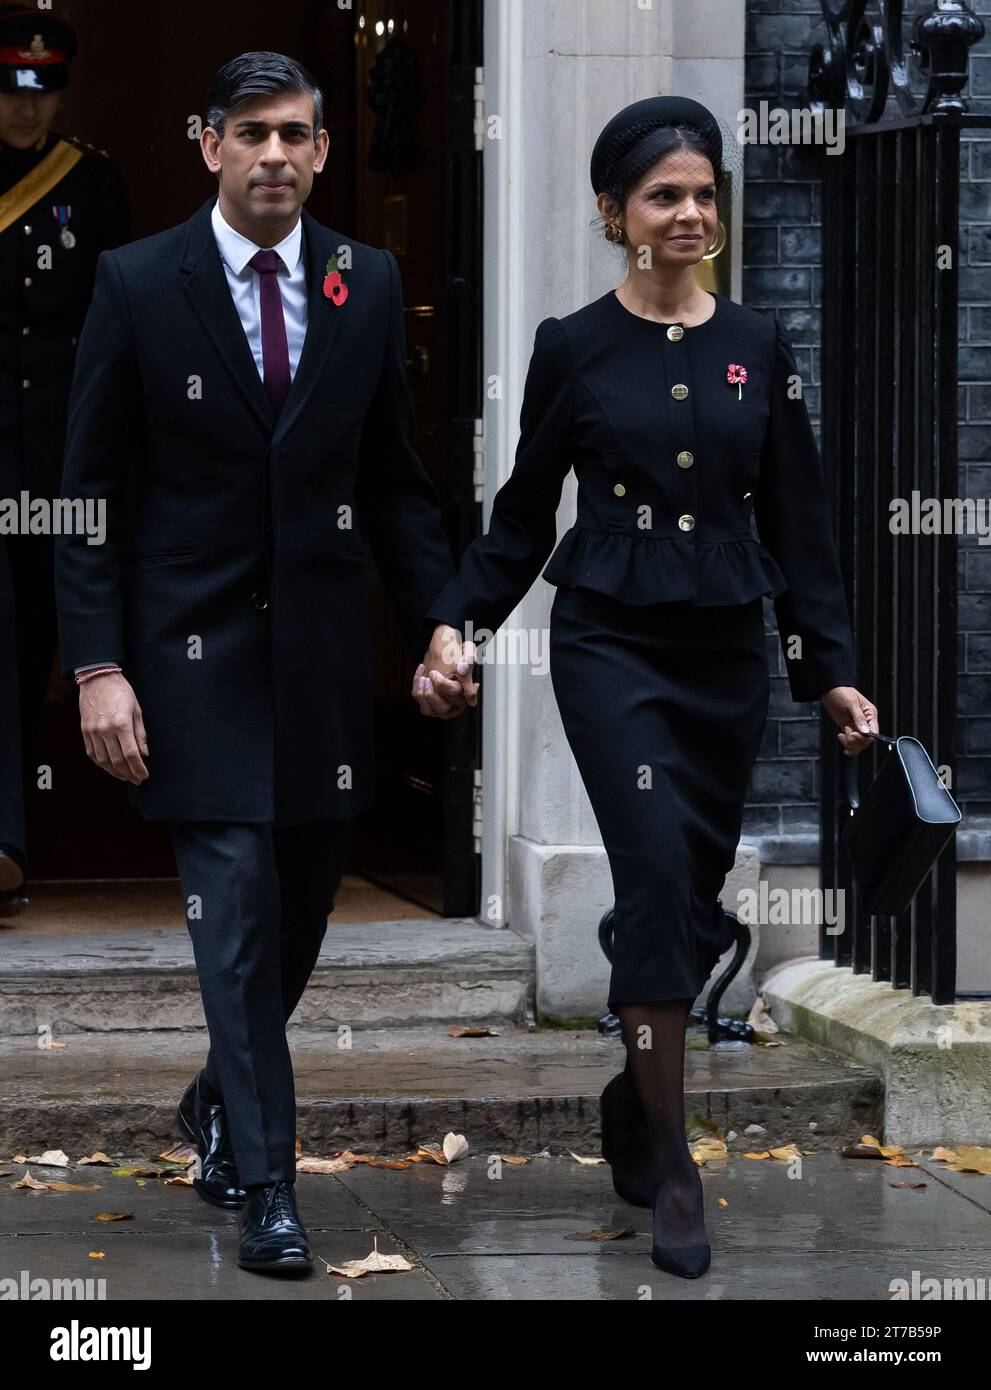 Rishi Sunak and Akshata Murthy walk through Whitehall to attend the Remembrance Sunday Service at the Cenotaph in London. Politicians and public figures walk through Whitehall to attend the Remembrance Sunday Service at the Cenotaph in London. Stock Photo